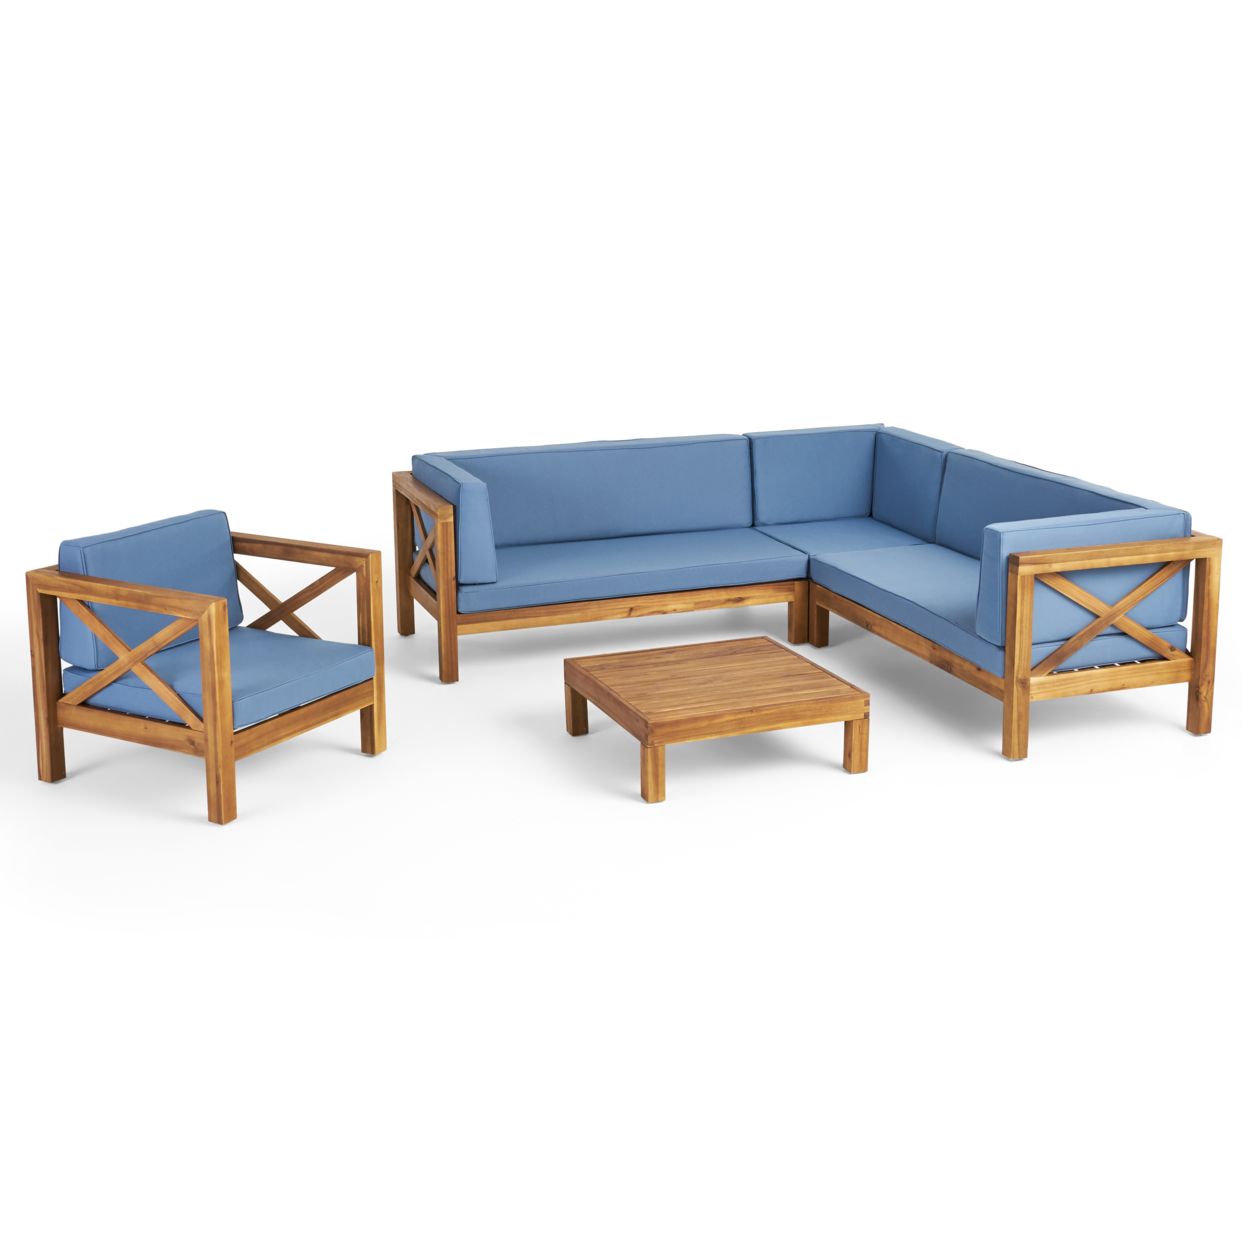 Morgan Outdoor 6 Seater Acacia Wood Sectional Sofa And Club Chair Set - Teak Finish + Red